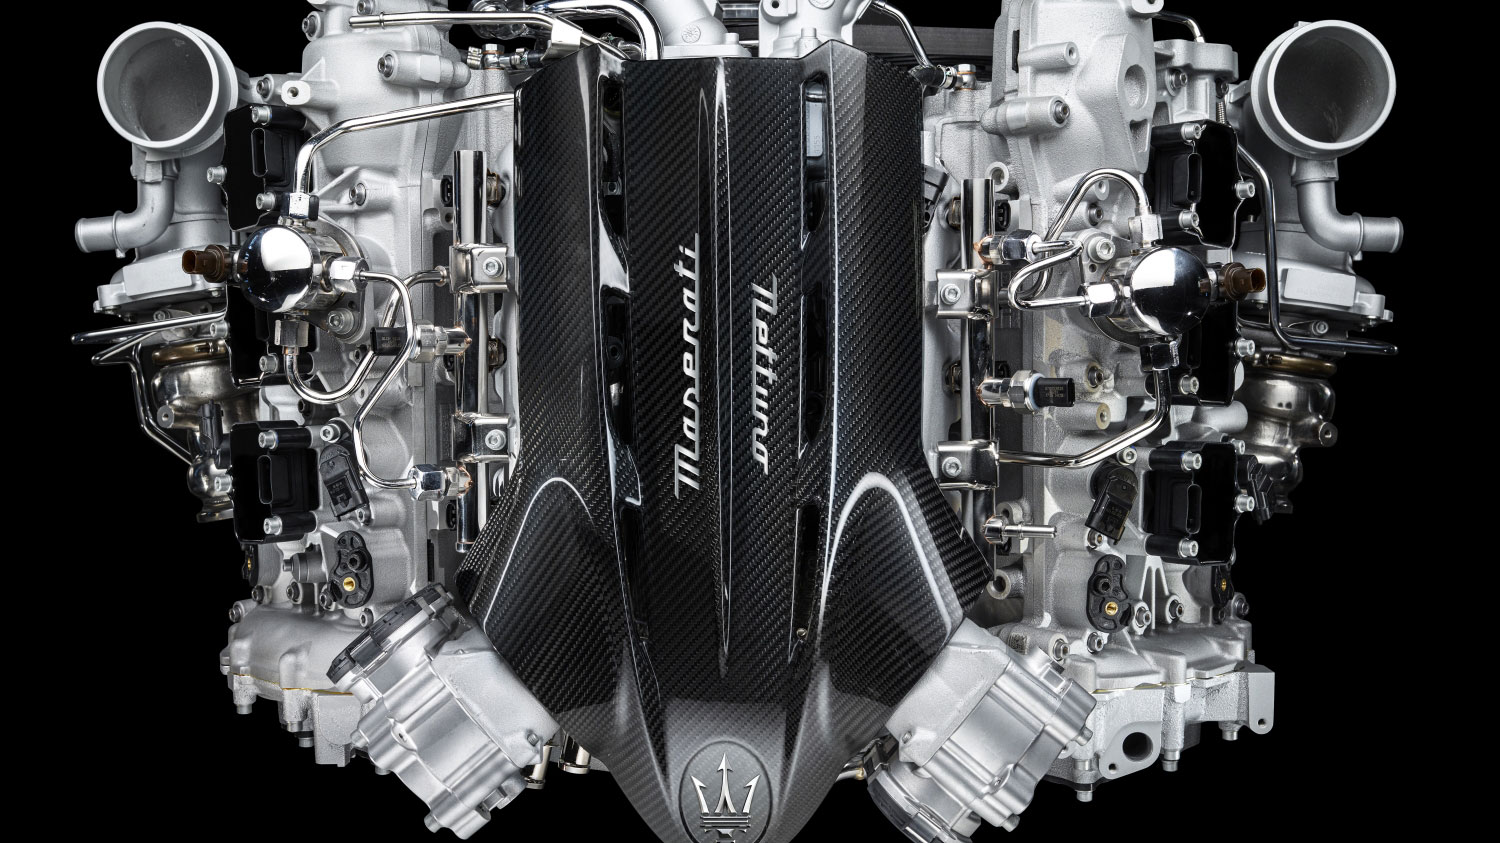 Maserati's all new Nettuno engine adopts Formula 1 technology for a road car.